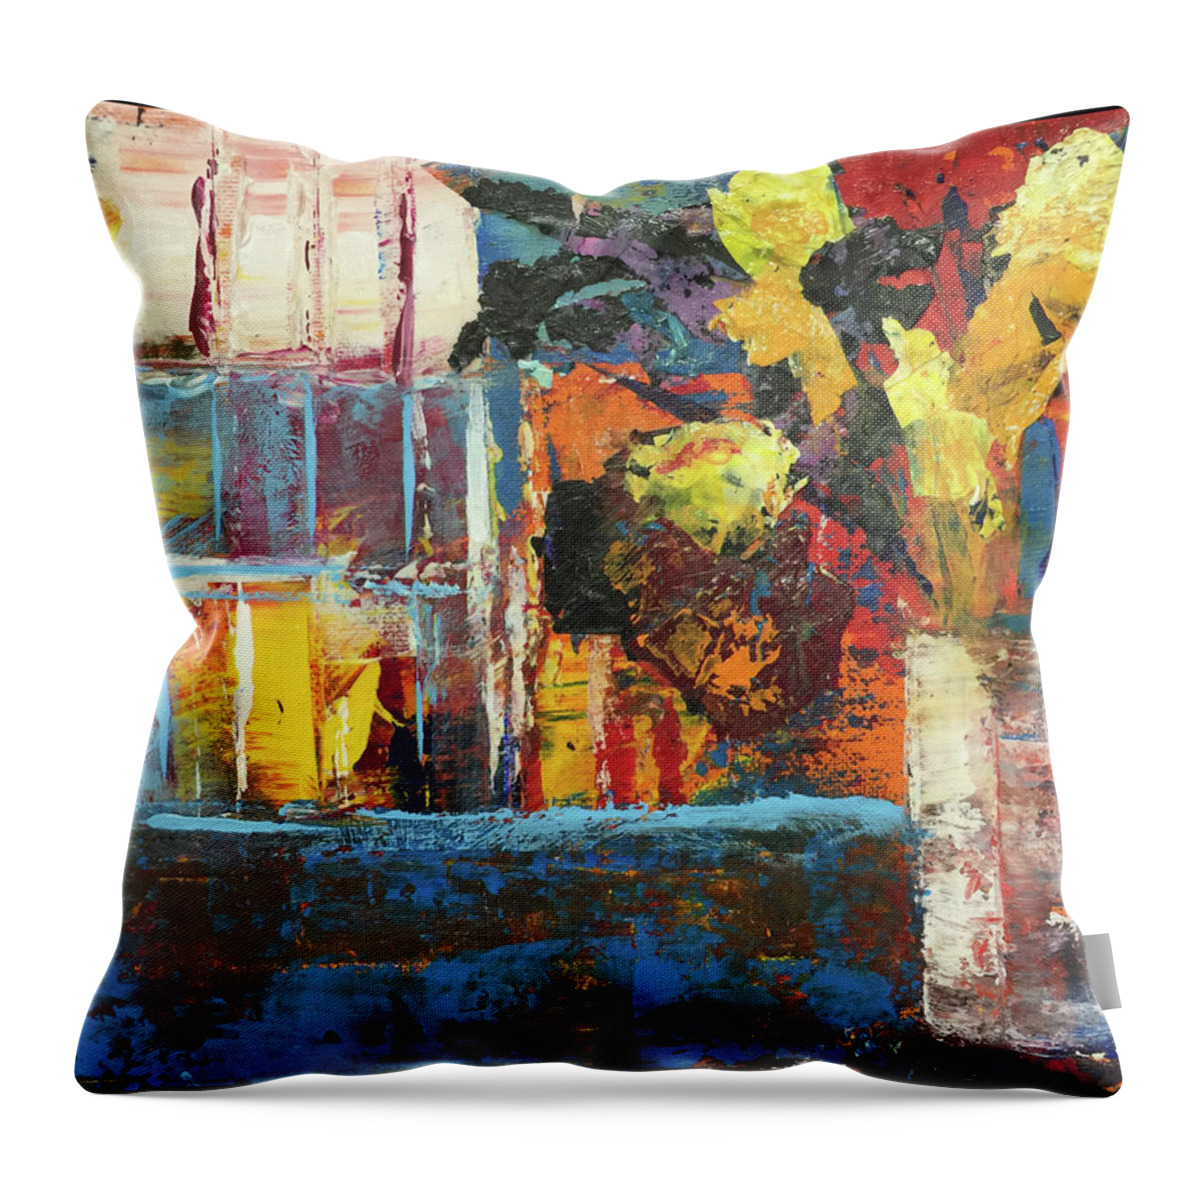 Yellow Throw Pillow featuring the painting By the Window by Linda Bailey